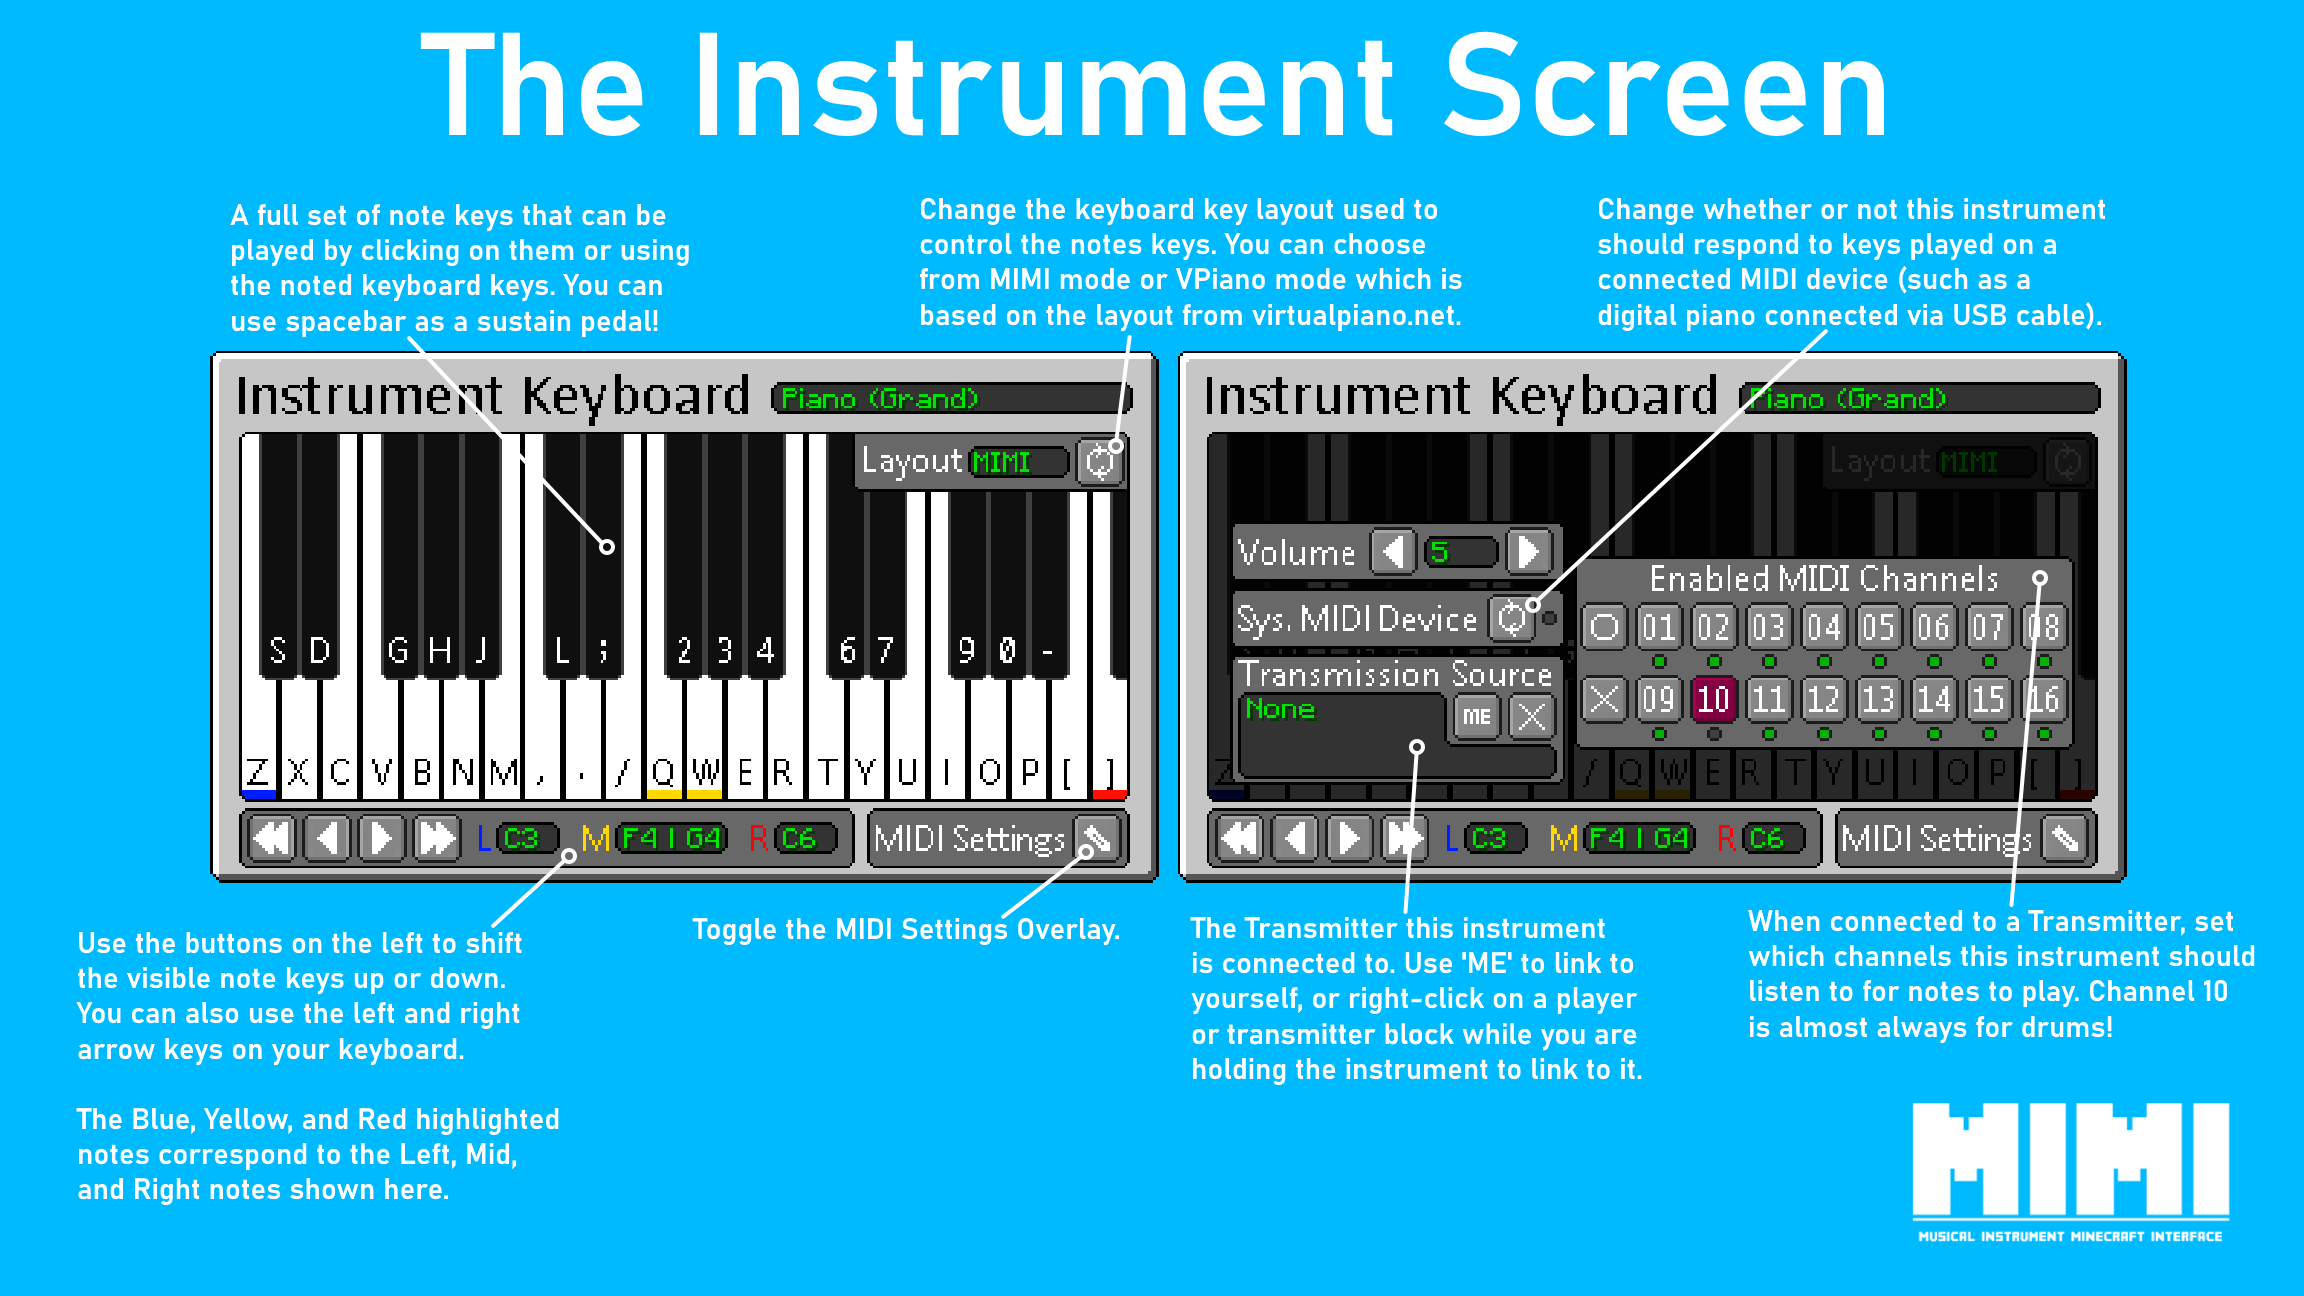 The Instrument Screen